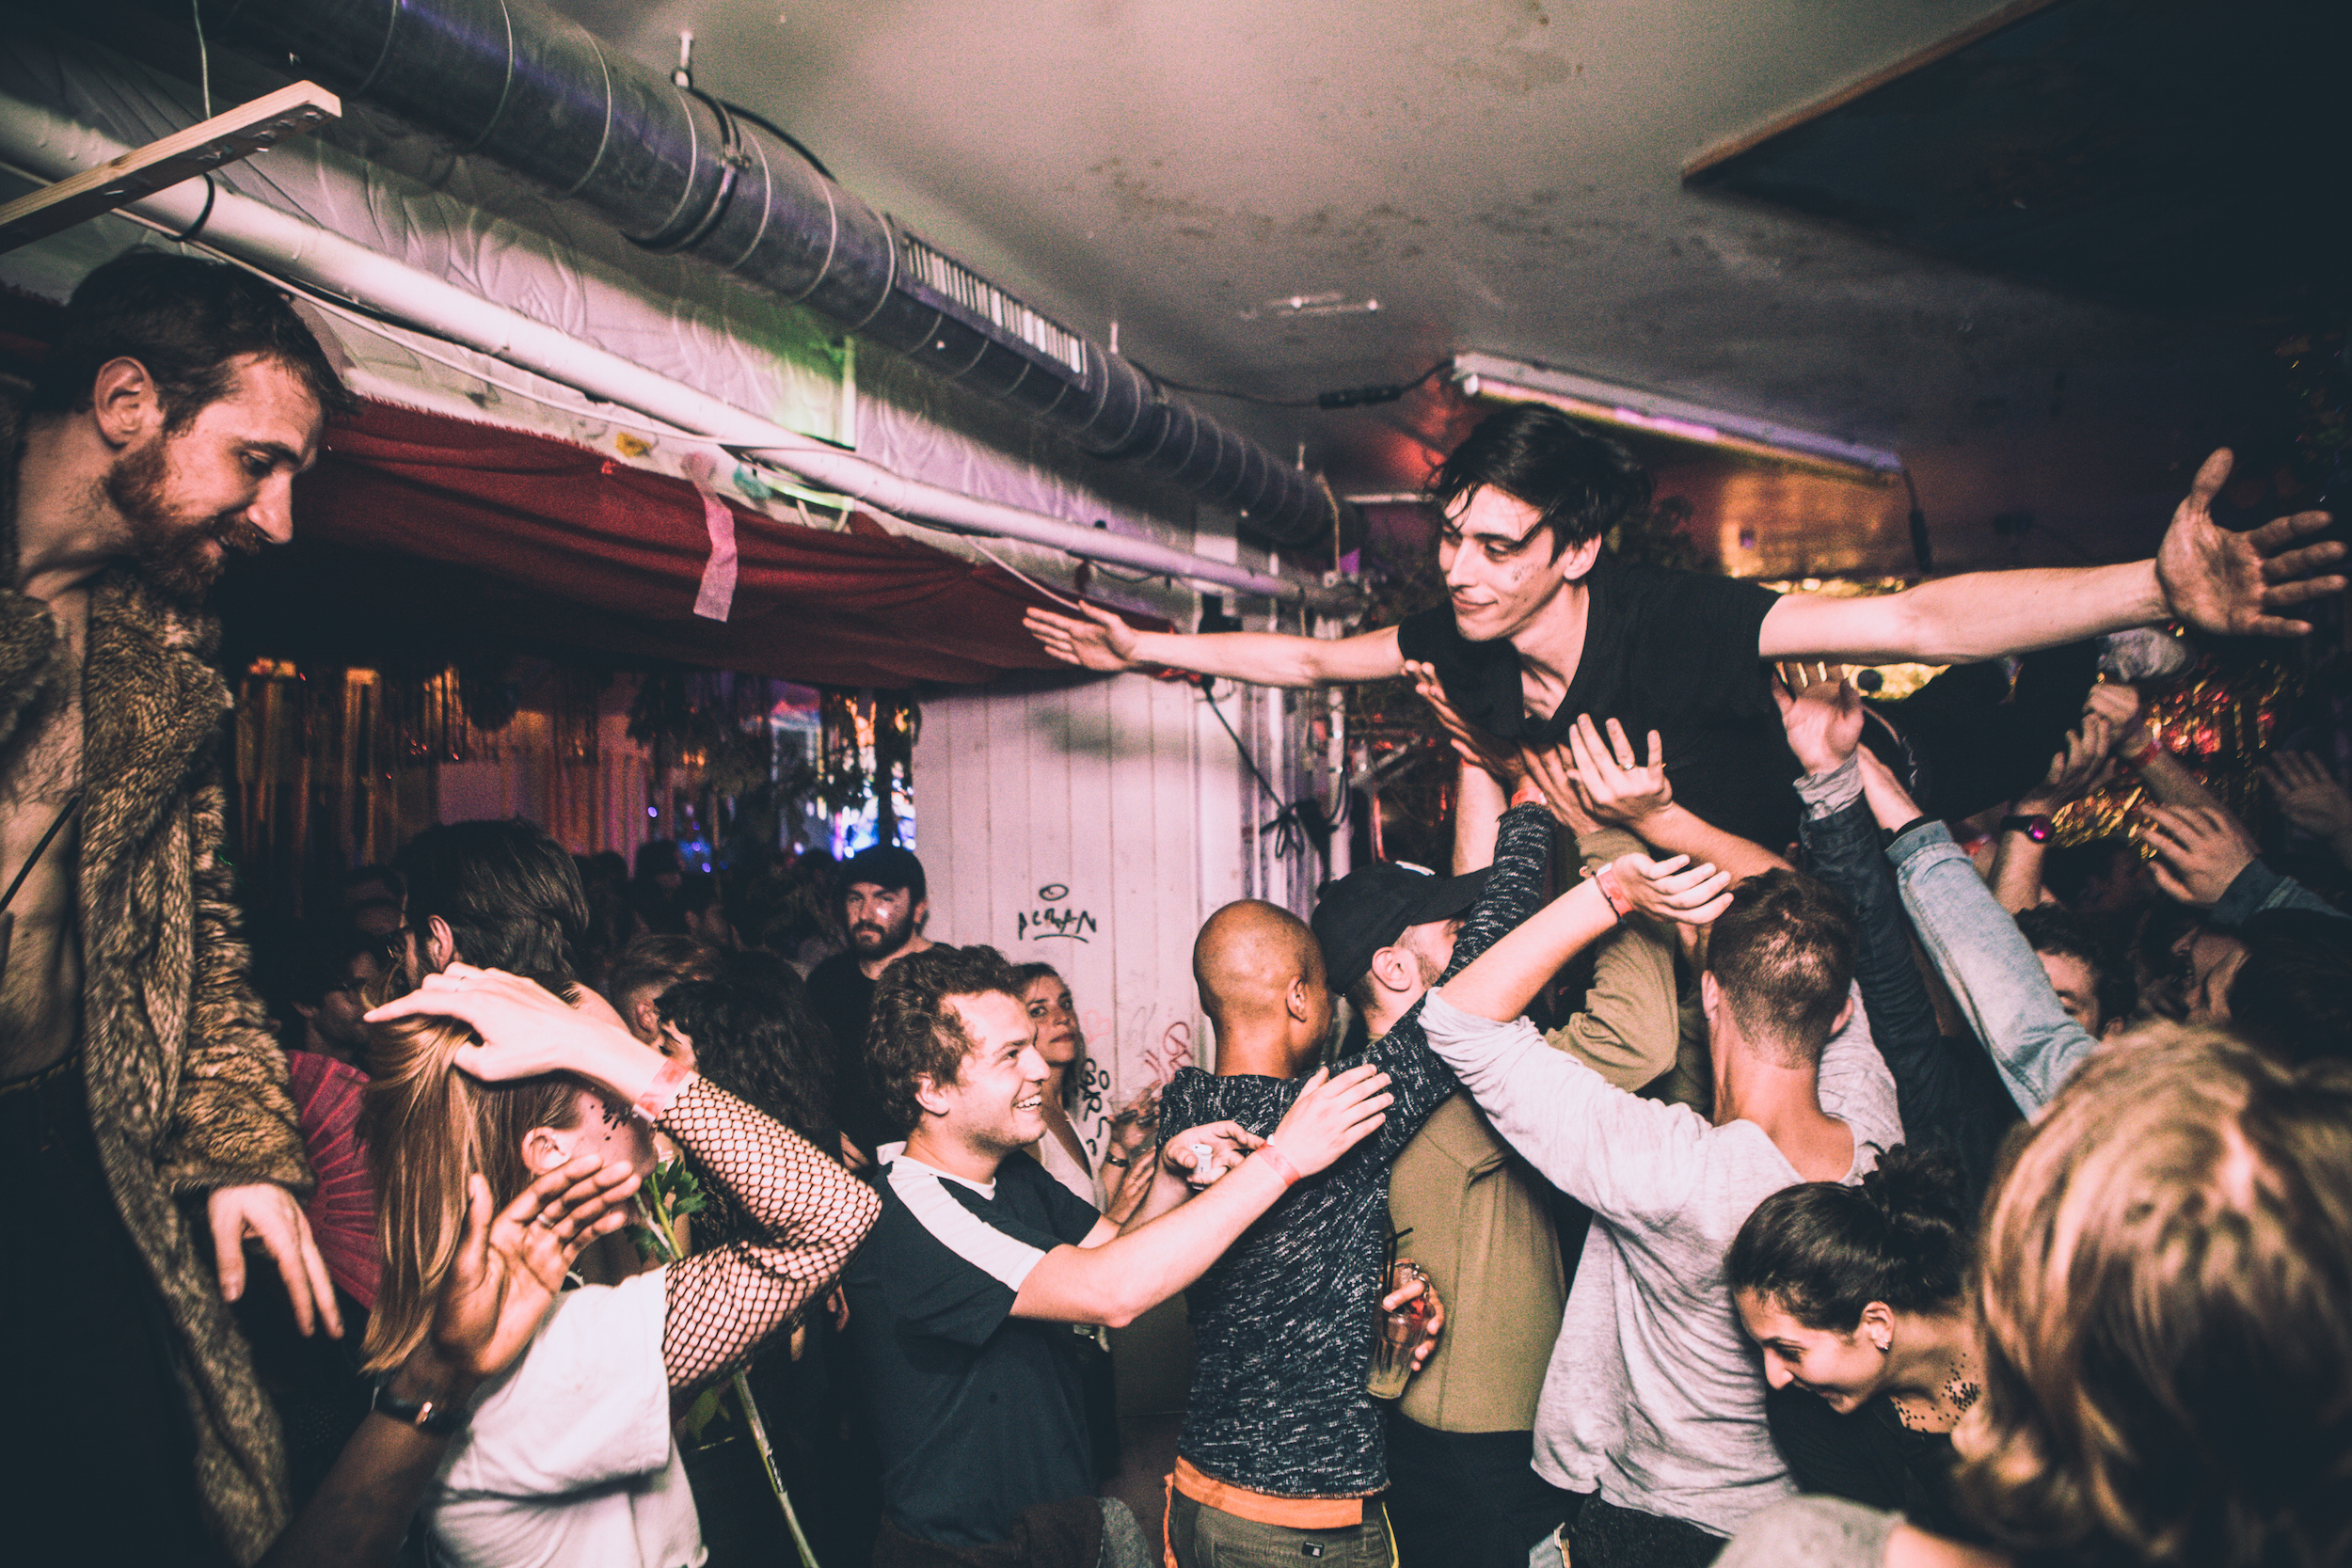 14 Best Clubs in Paris for a Big Night Out